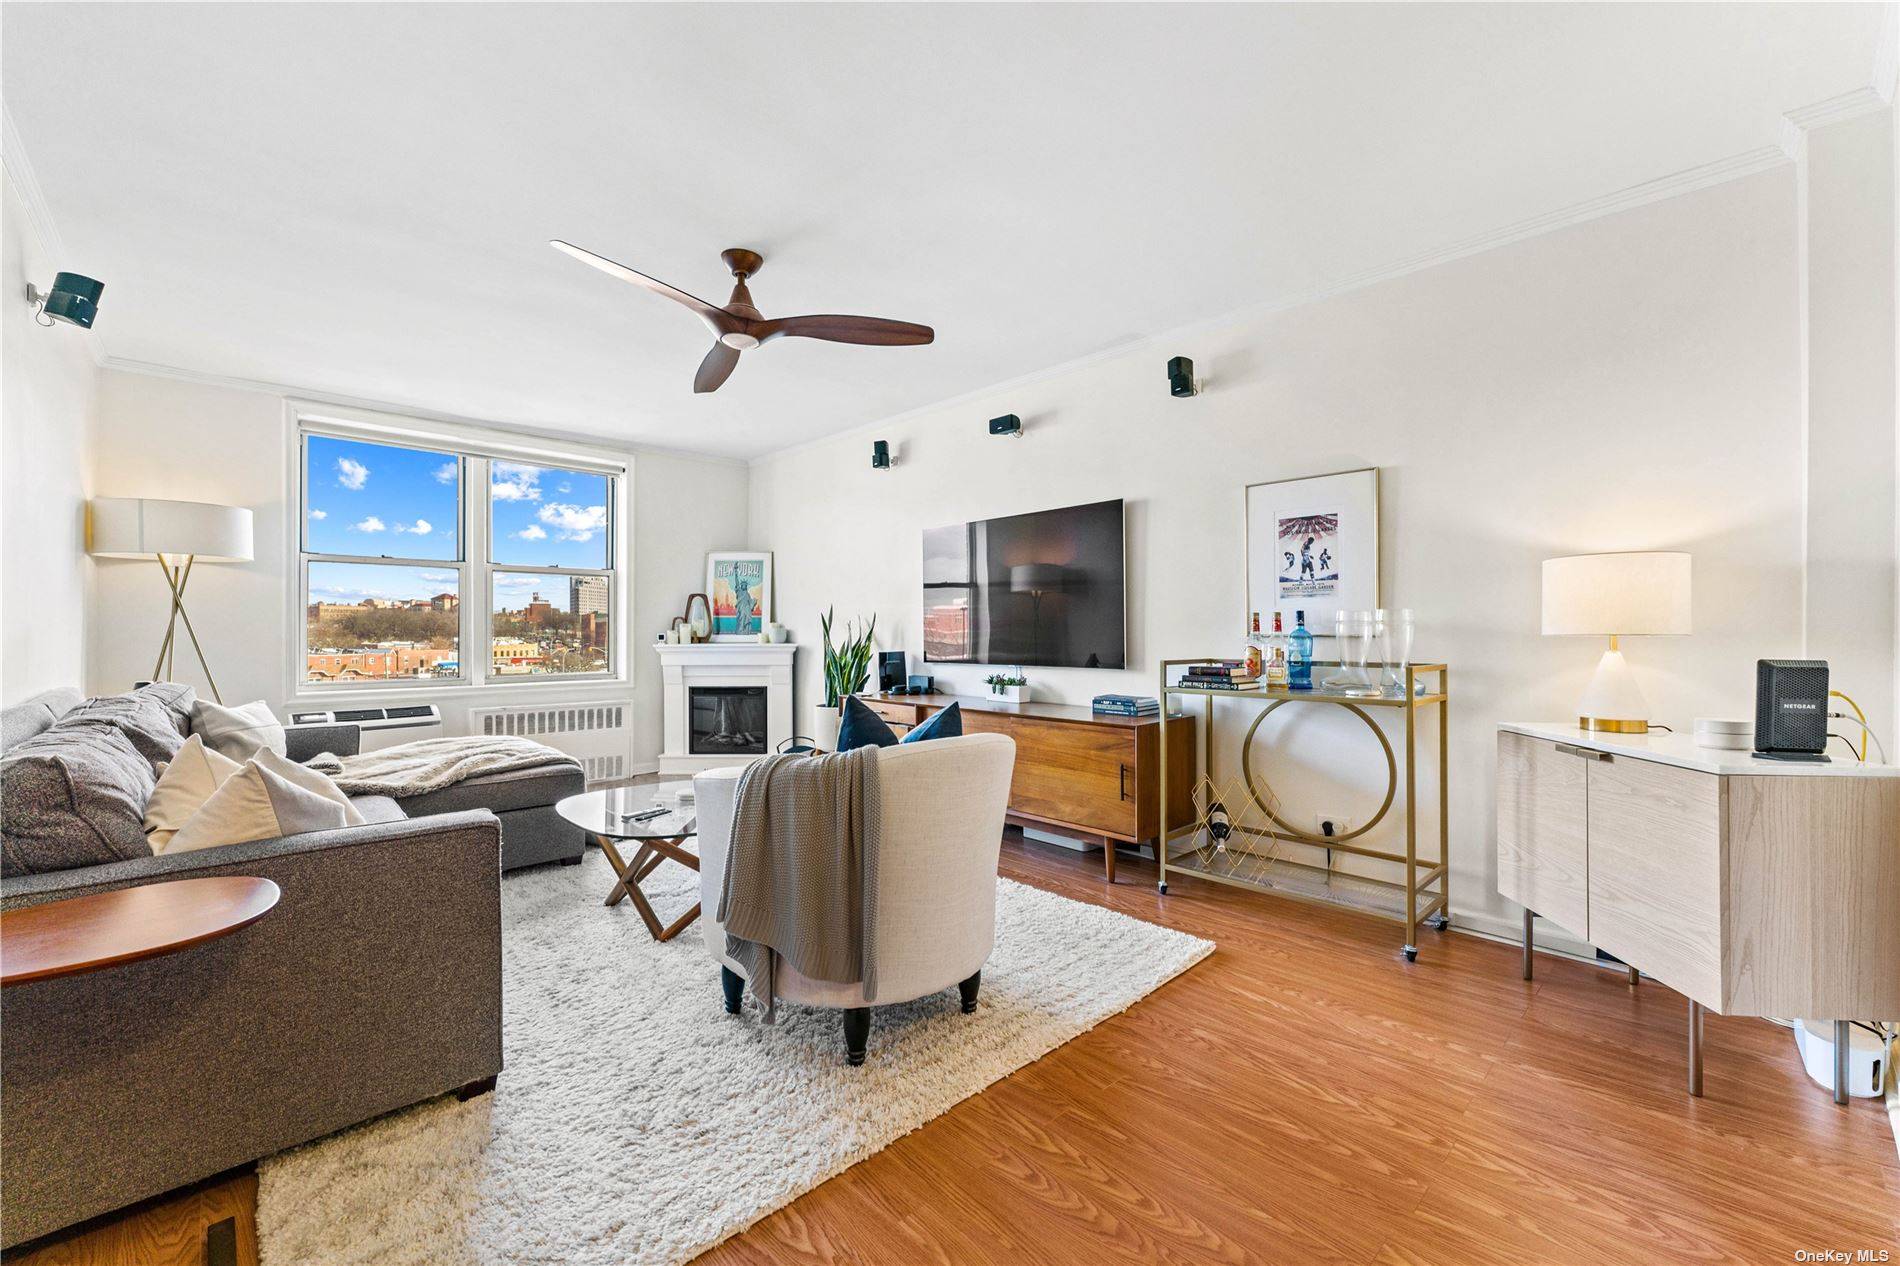 Move in ready ! This impeccably finished 1 BR unit is the perfect escape from the city.